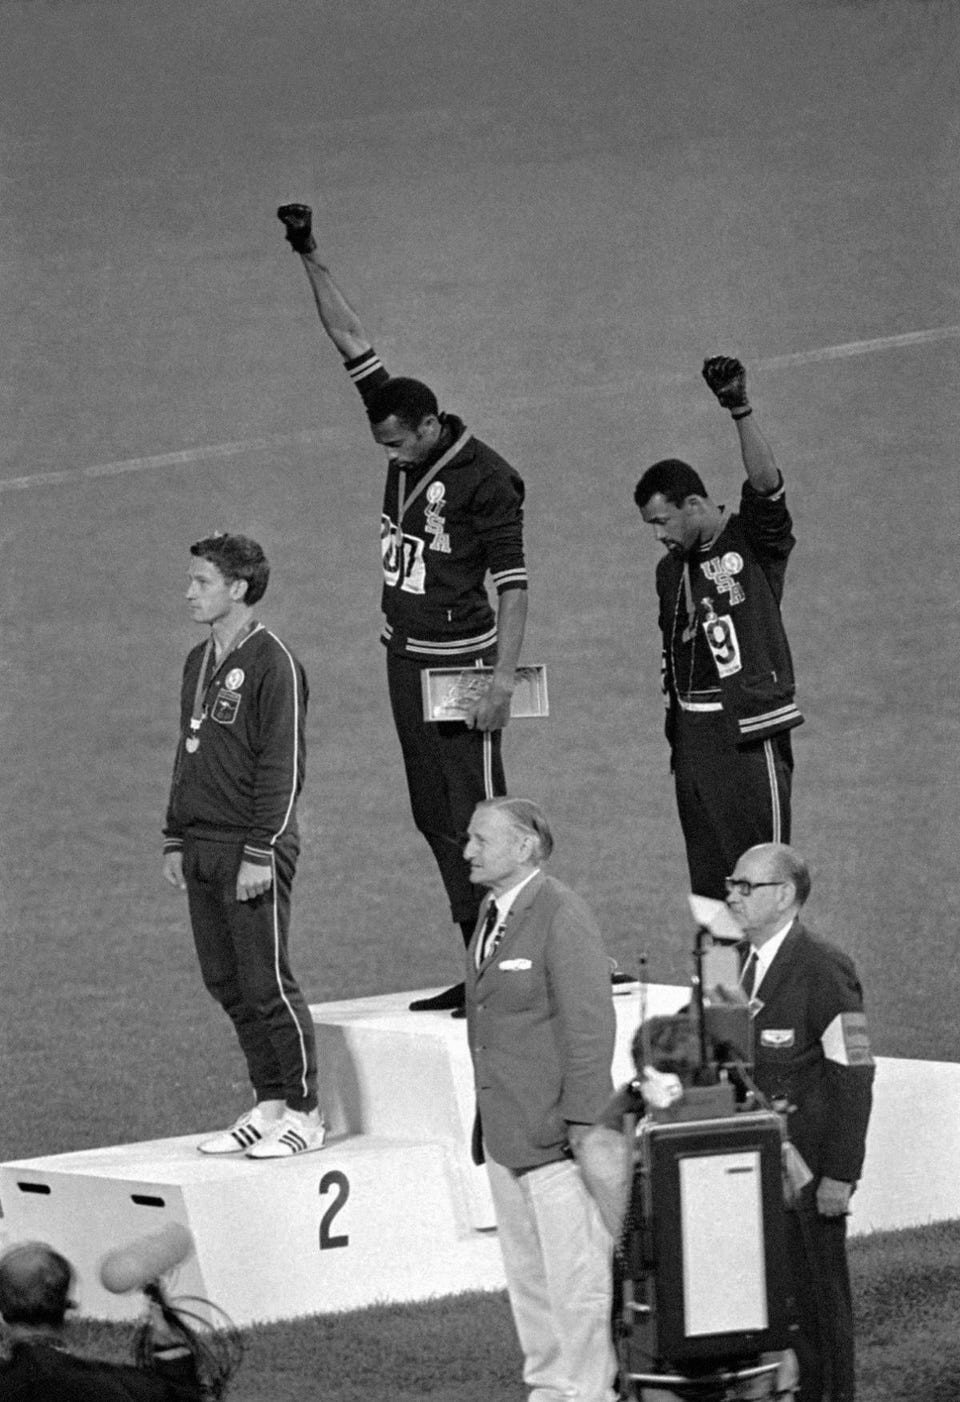 More than half-a-century after the famous protest made by Tommie Smith and John Carlos at Mexico City 1968, athlete activism at Olympics remains a key issue ©Getty Images